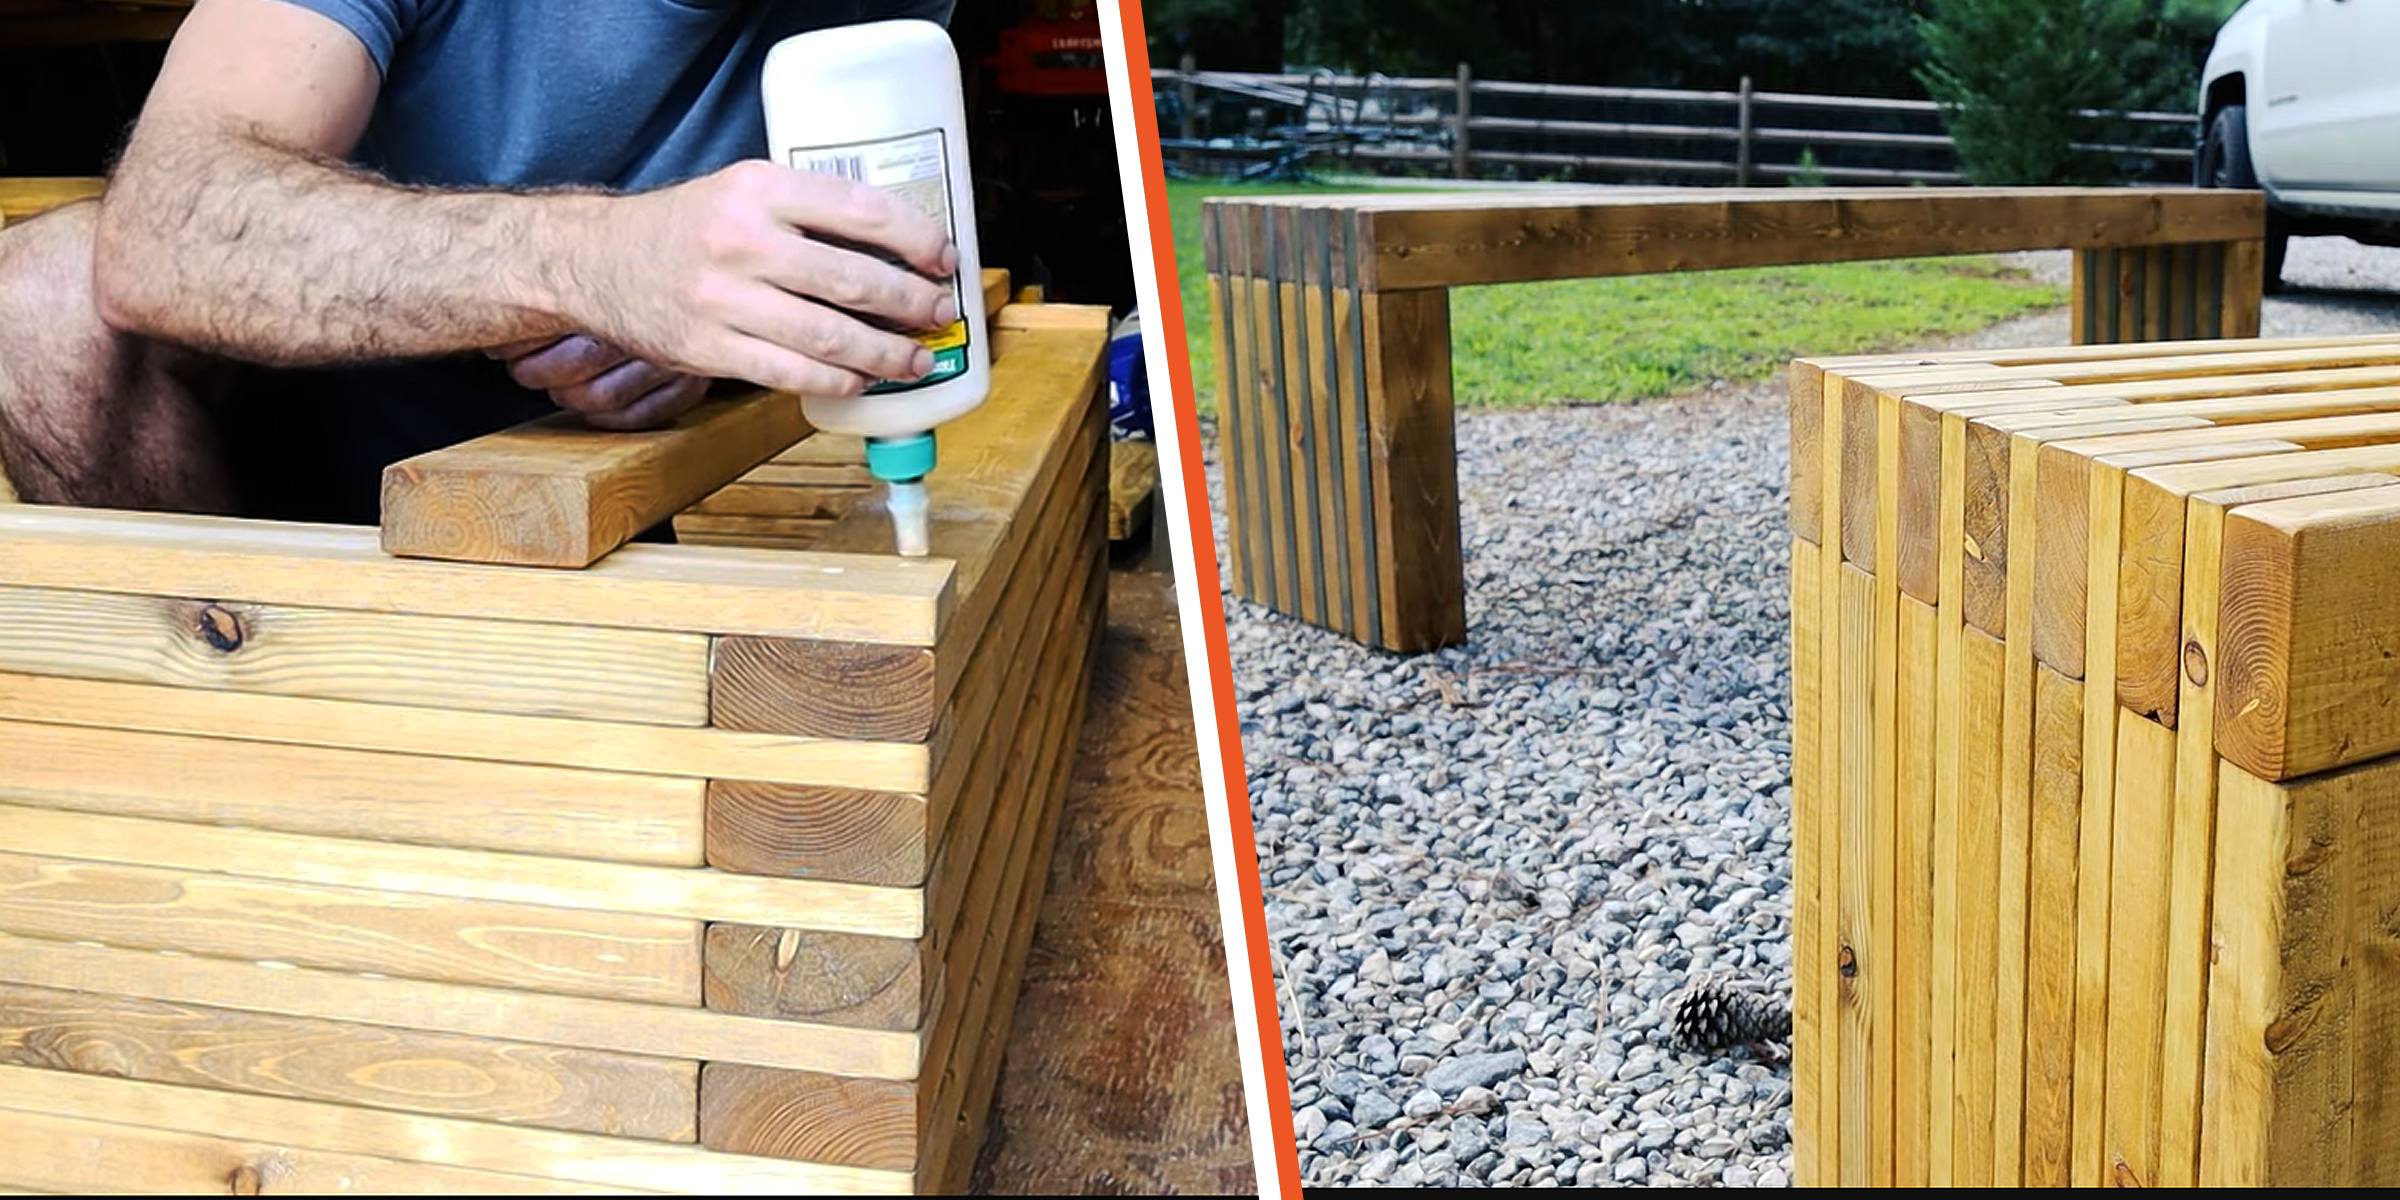 A person creating a DIY wooden bench | Source: YouTube/@KellyConcepts